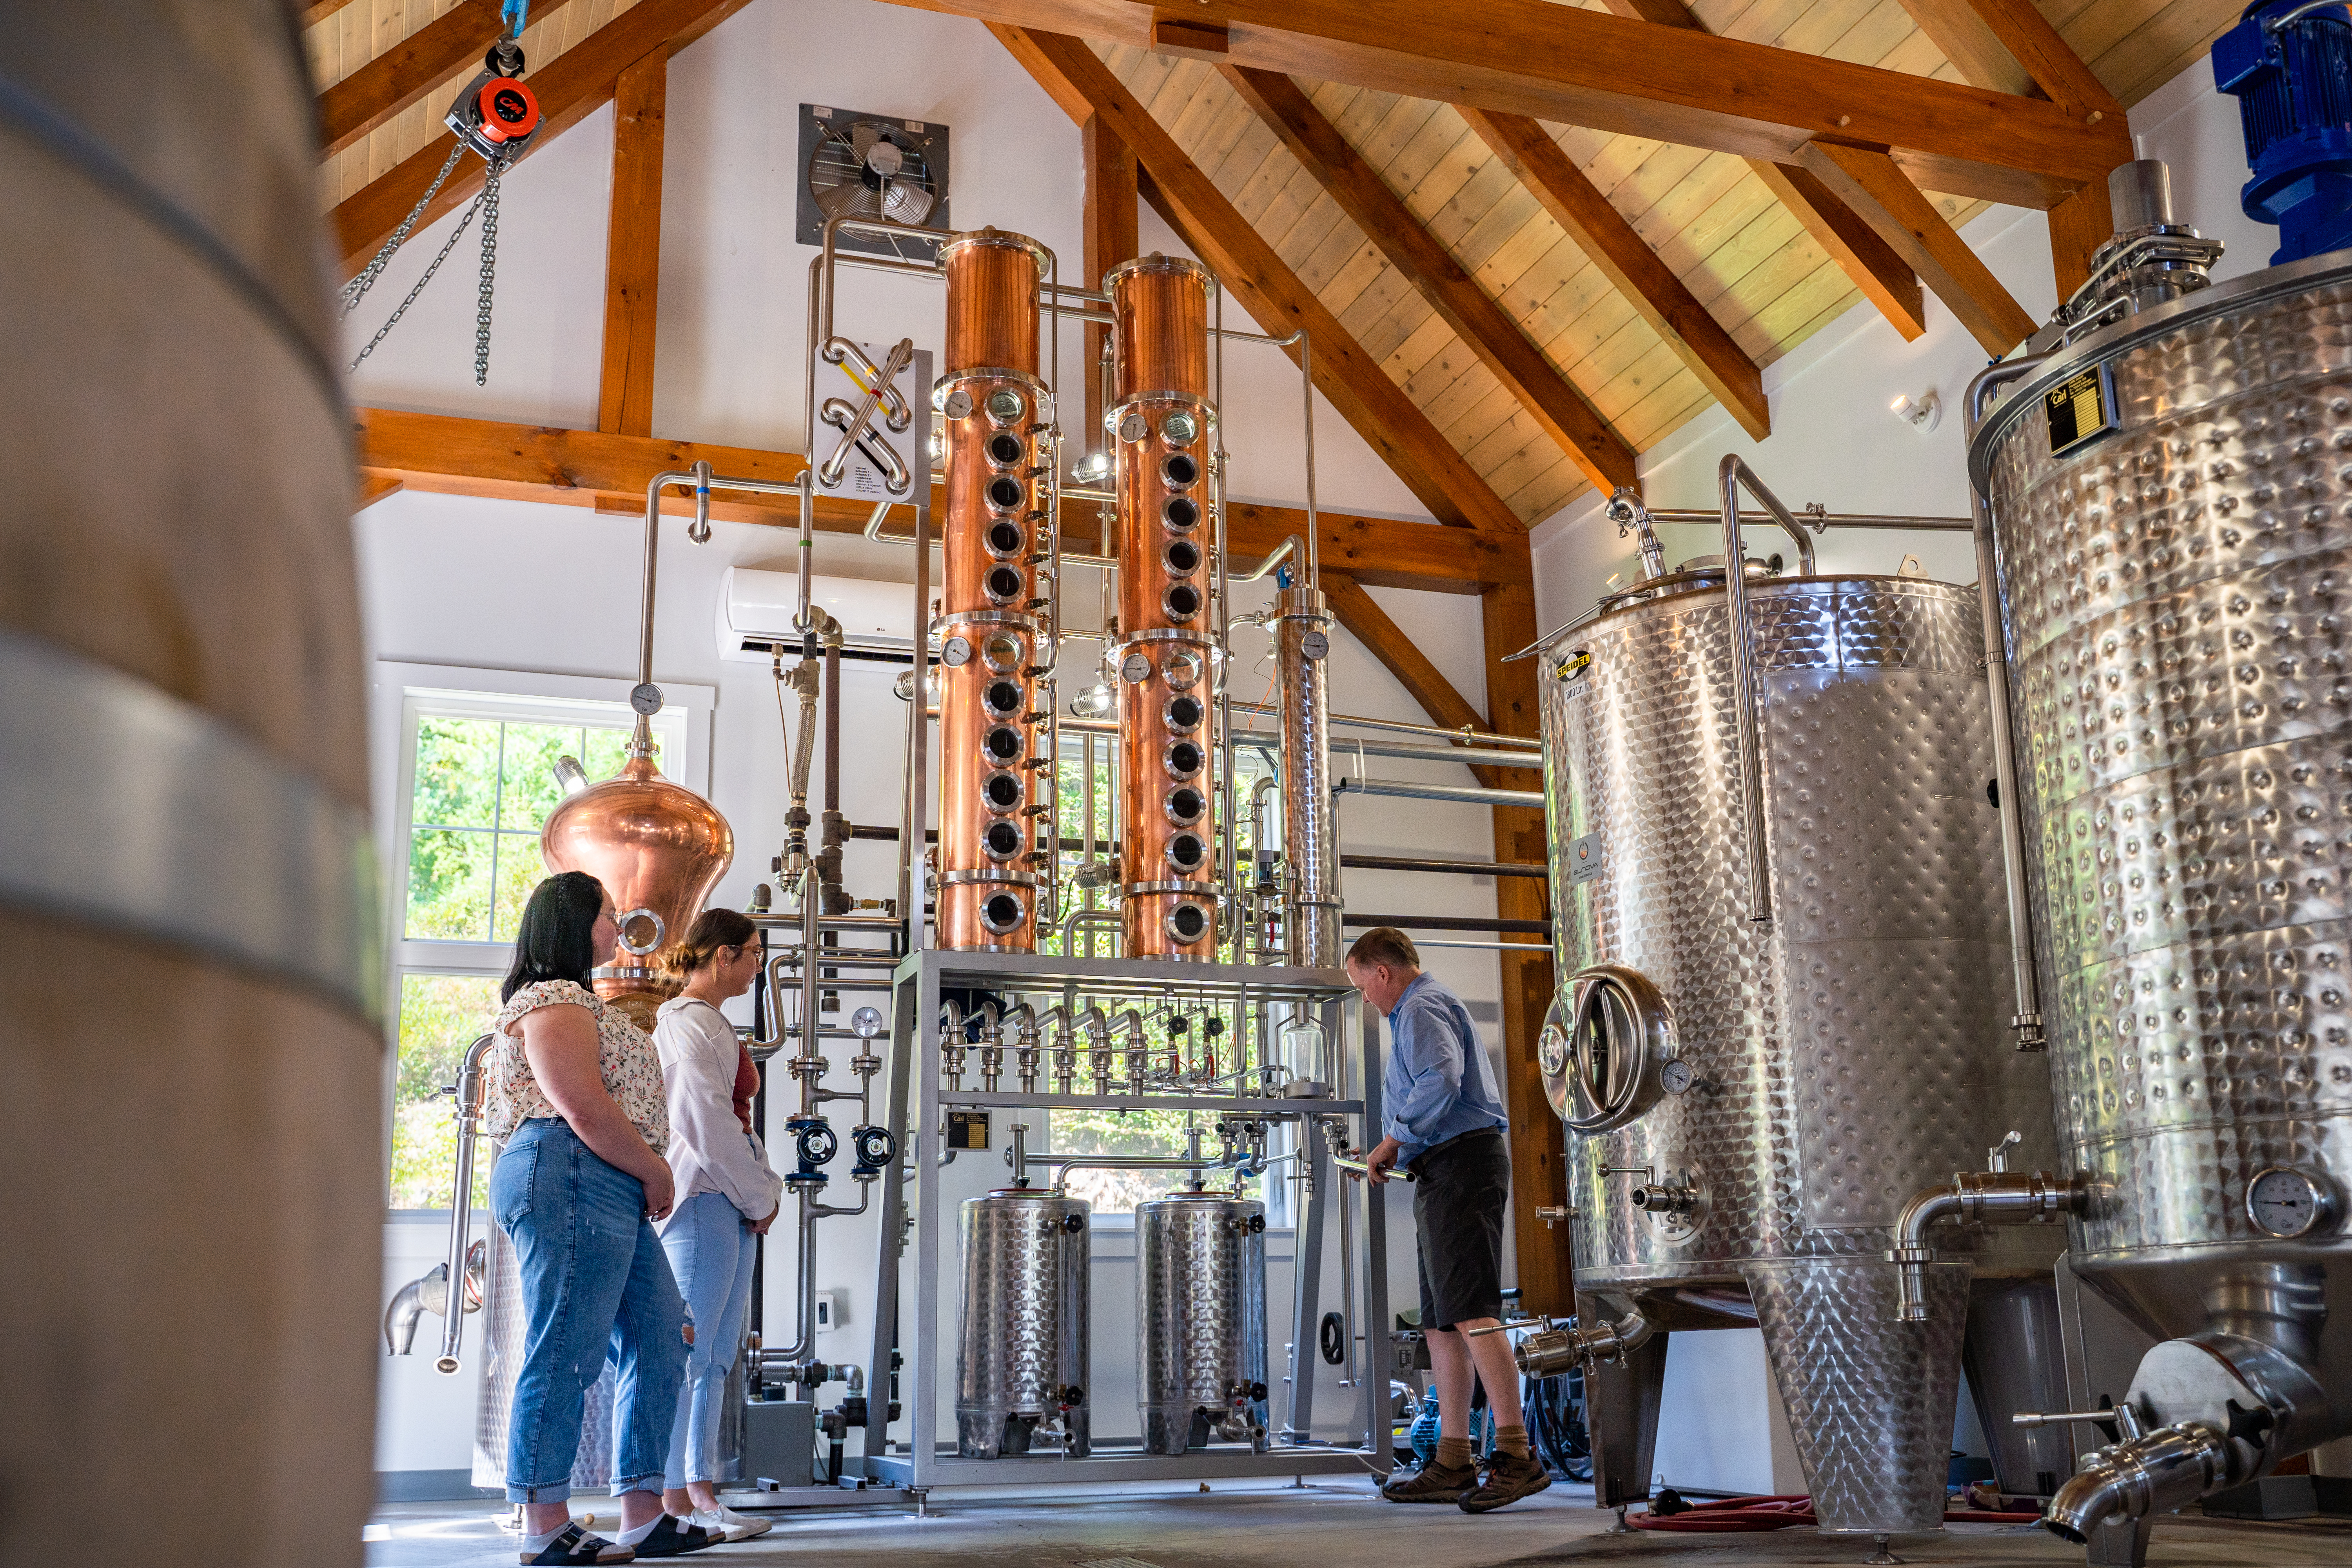 Tall metal distillers in a white vaulted room with a wooden ceiling. Man in a blue shirt giving a tour to two women.